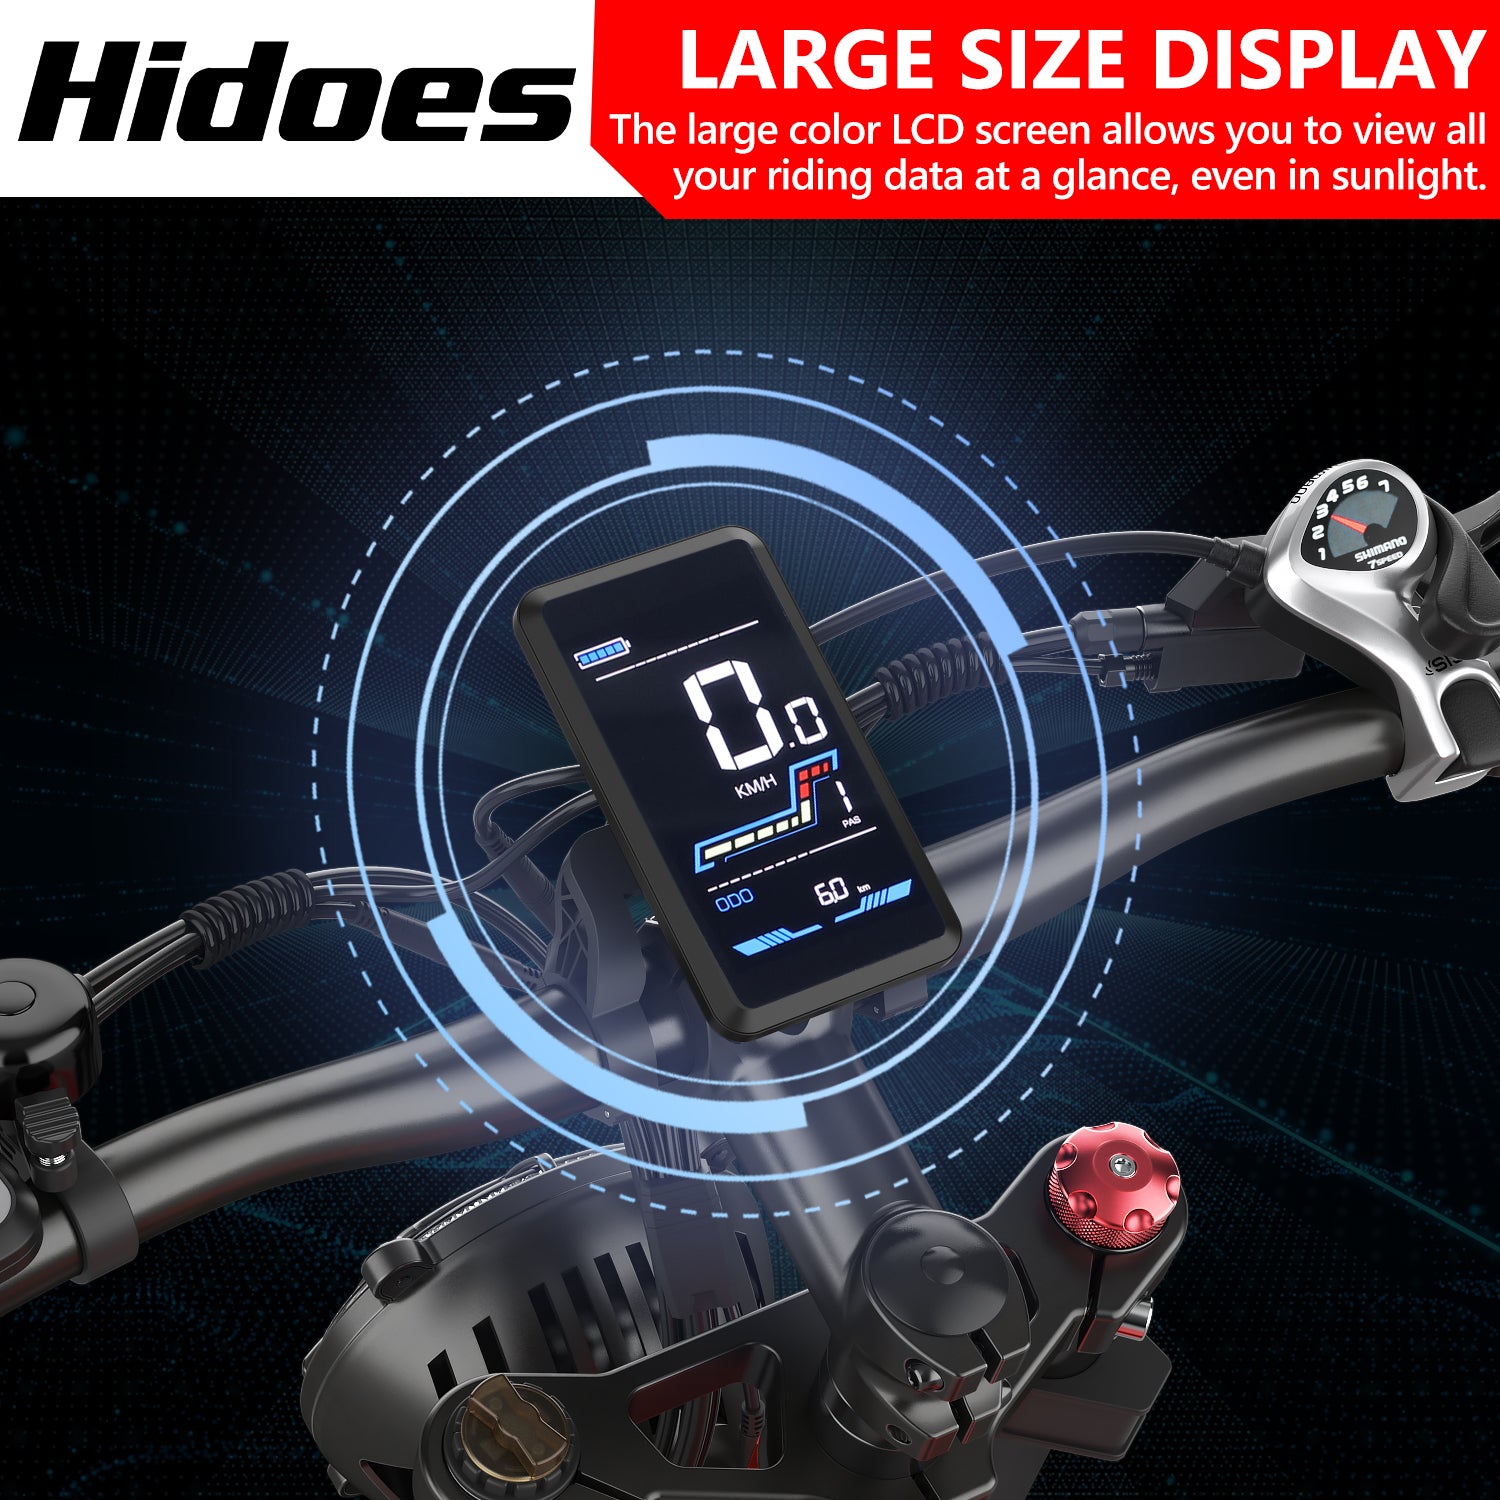 Hidoes B6 All Terrain electric bike with colorful LCD Display